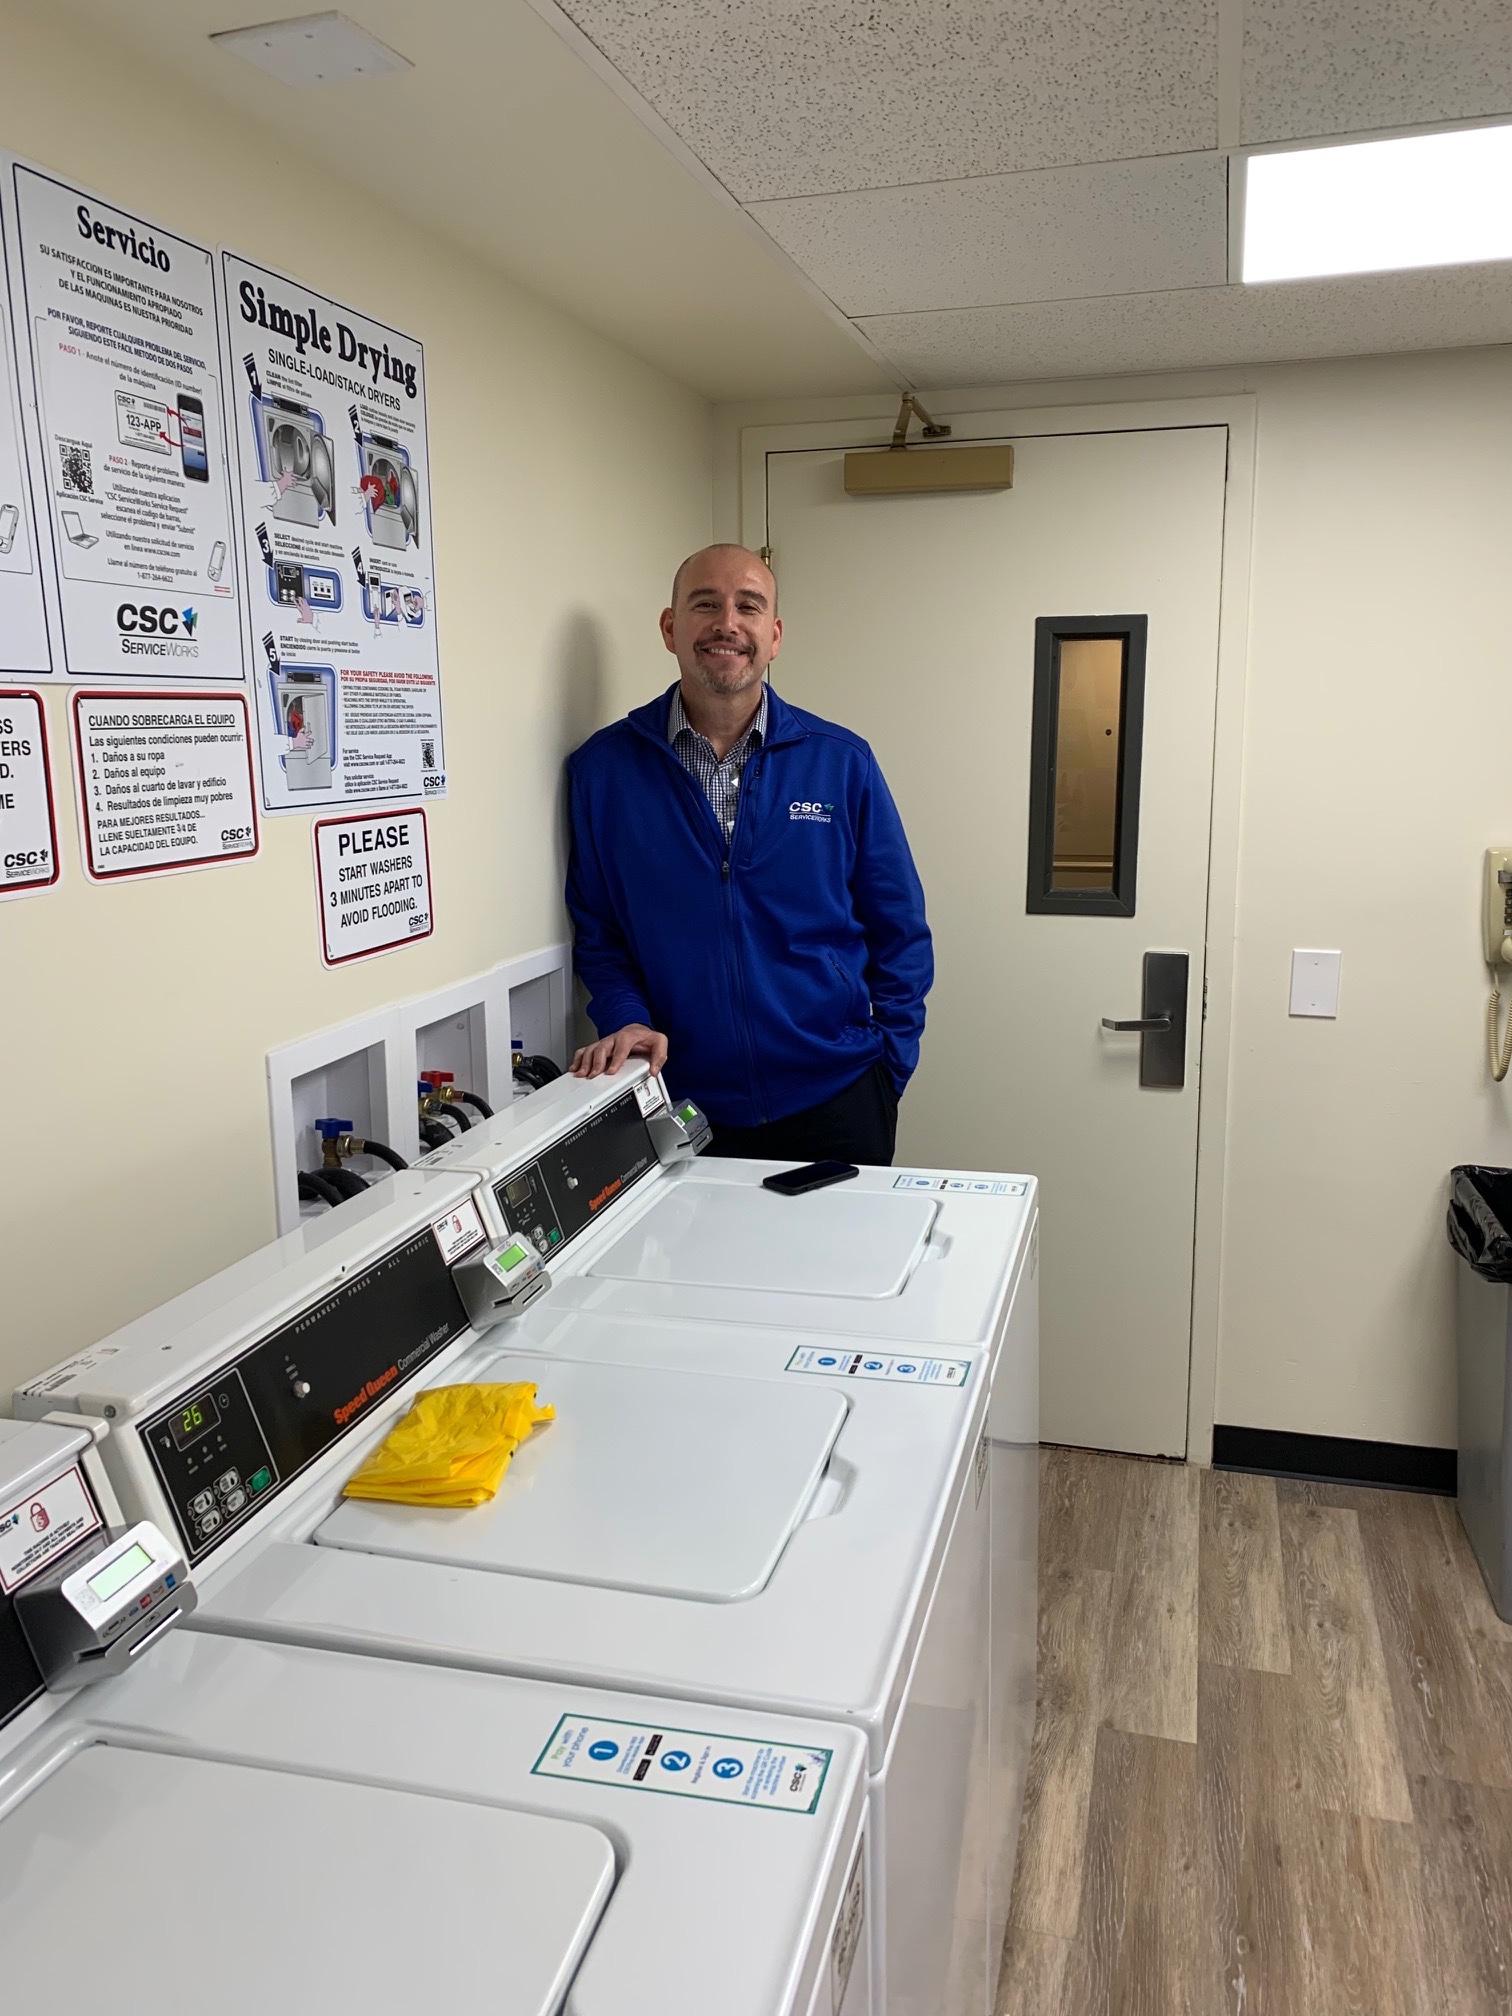 CSC ServiceWorks employee smiling and standing near a laundry machine